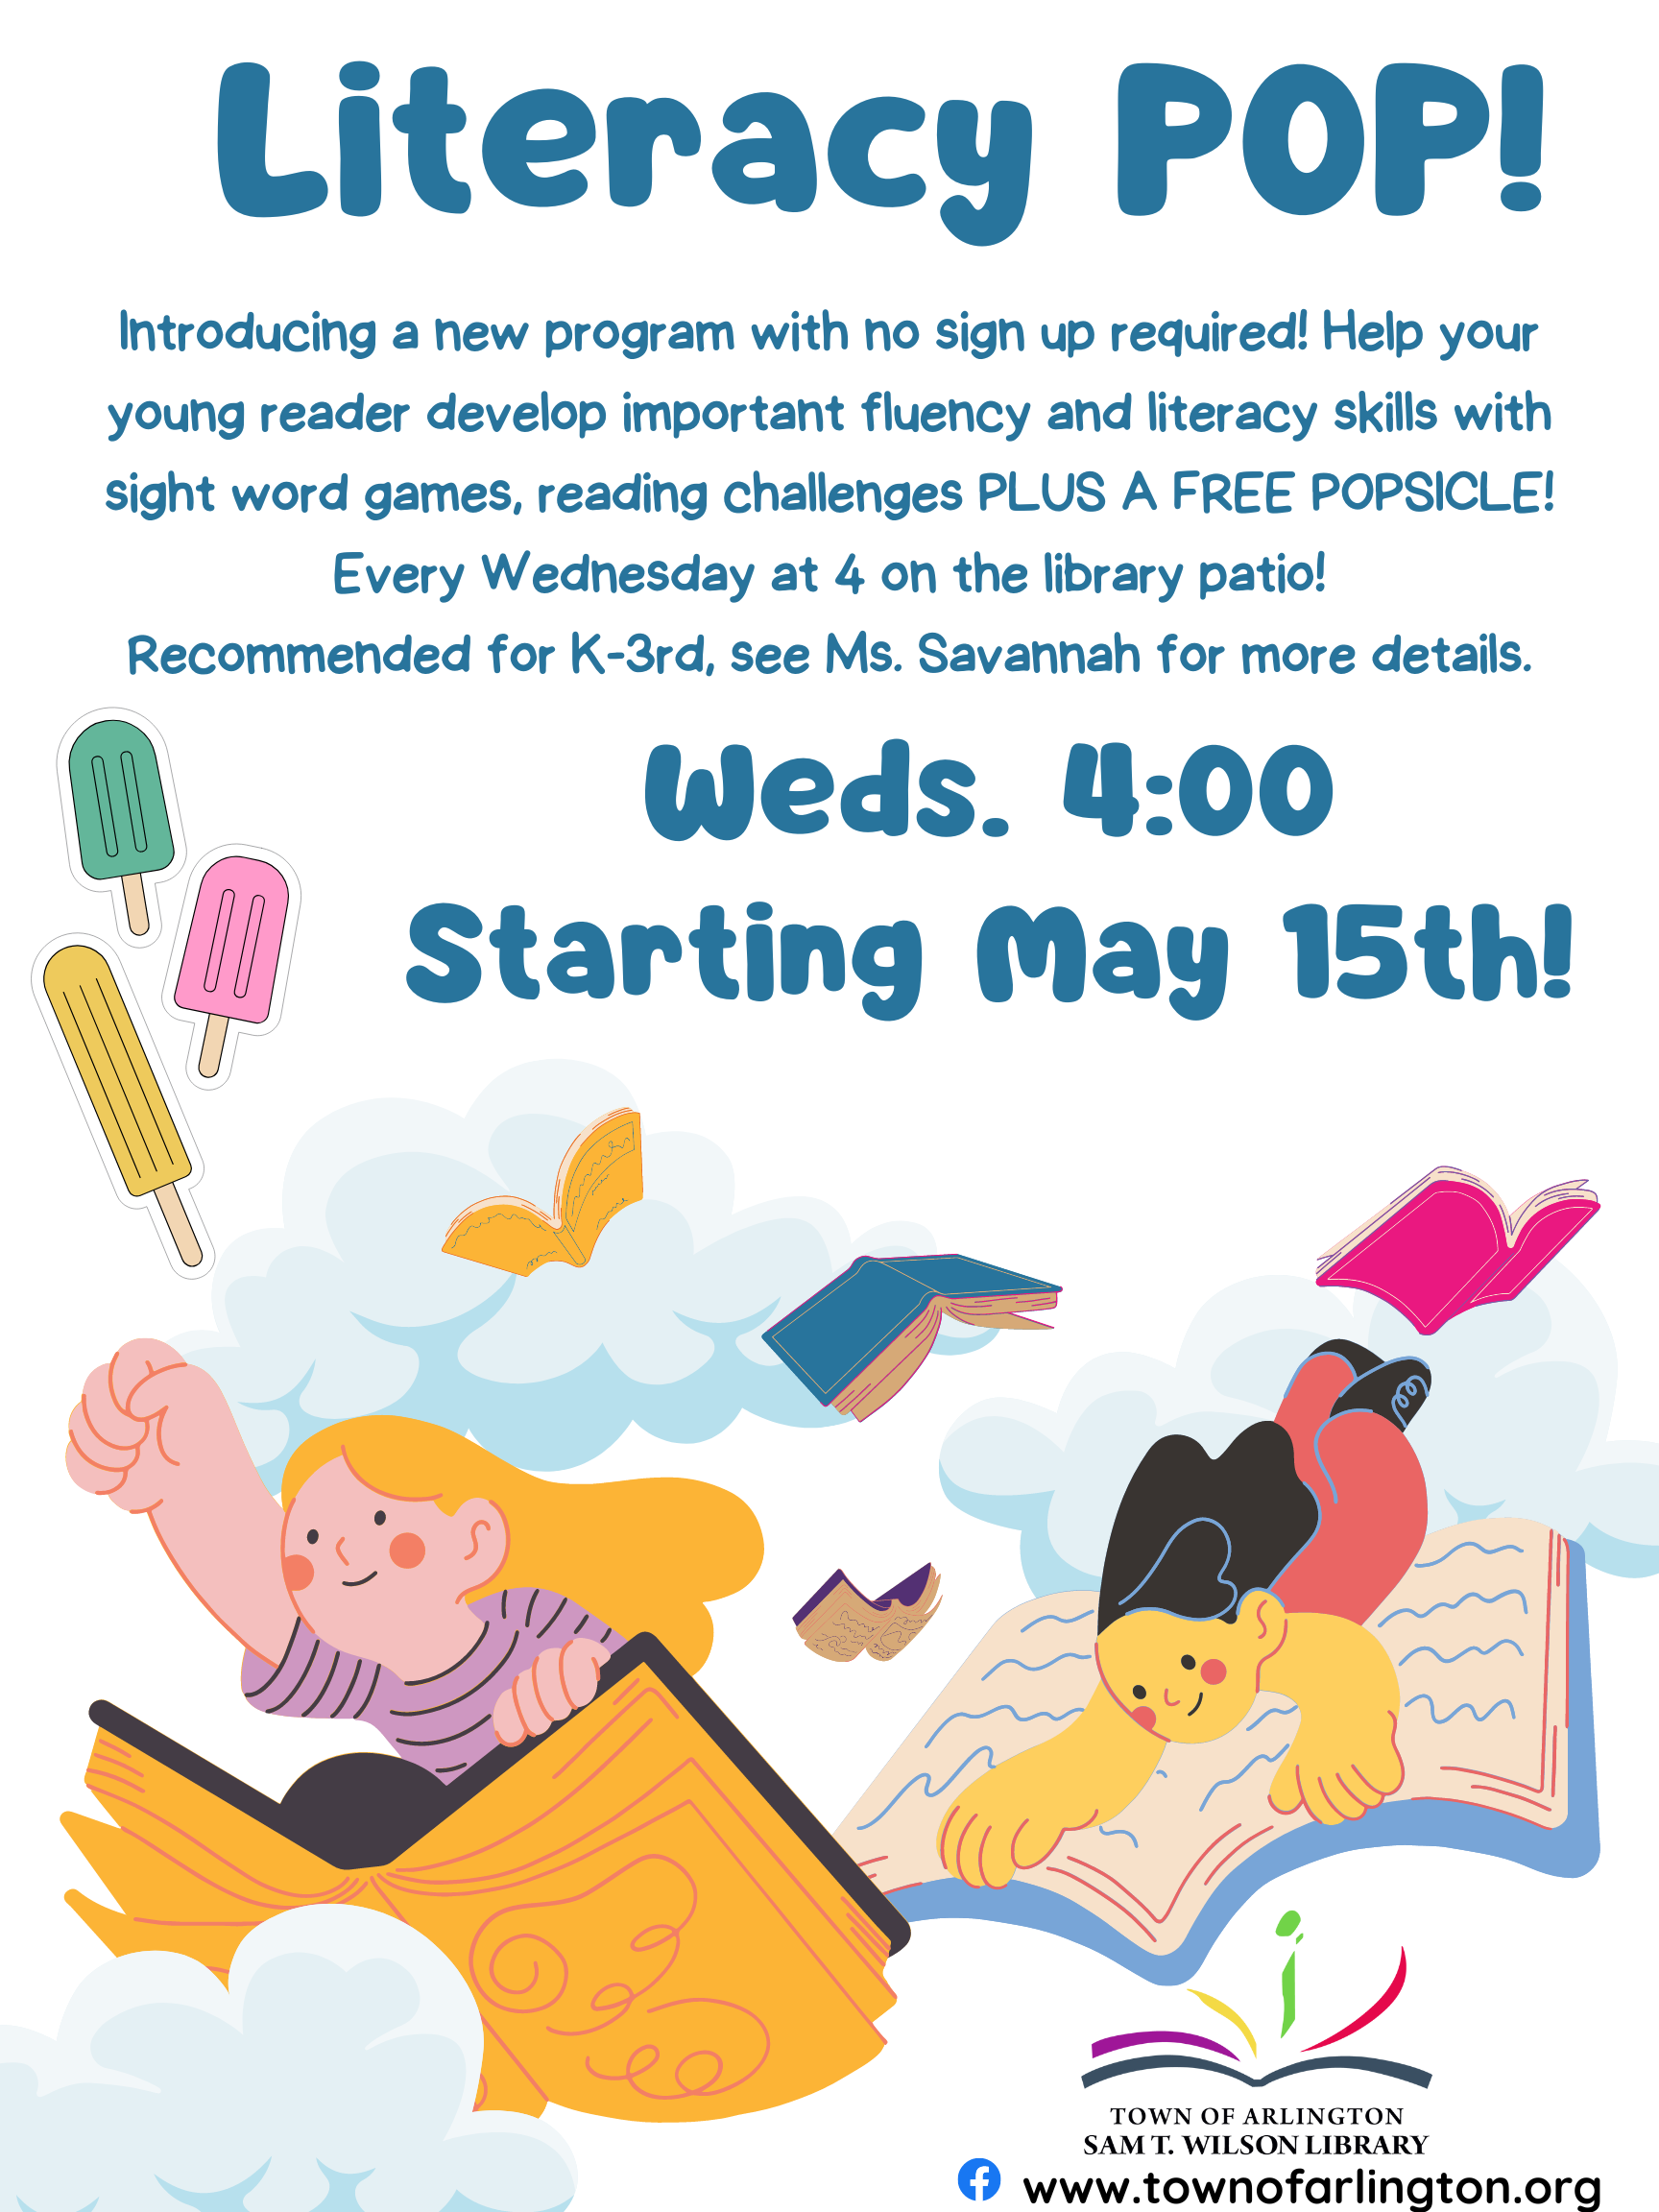 Literacy POP flyers for every Wednesday at 4pm, starting May 15th. Course has no sign-up required and helps K-3rd graders work on fluency and literacy skills. Free Popsicle each class